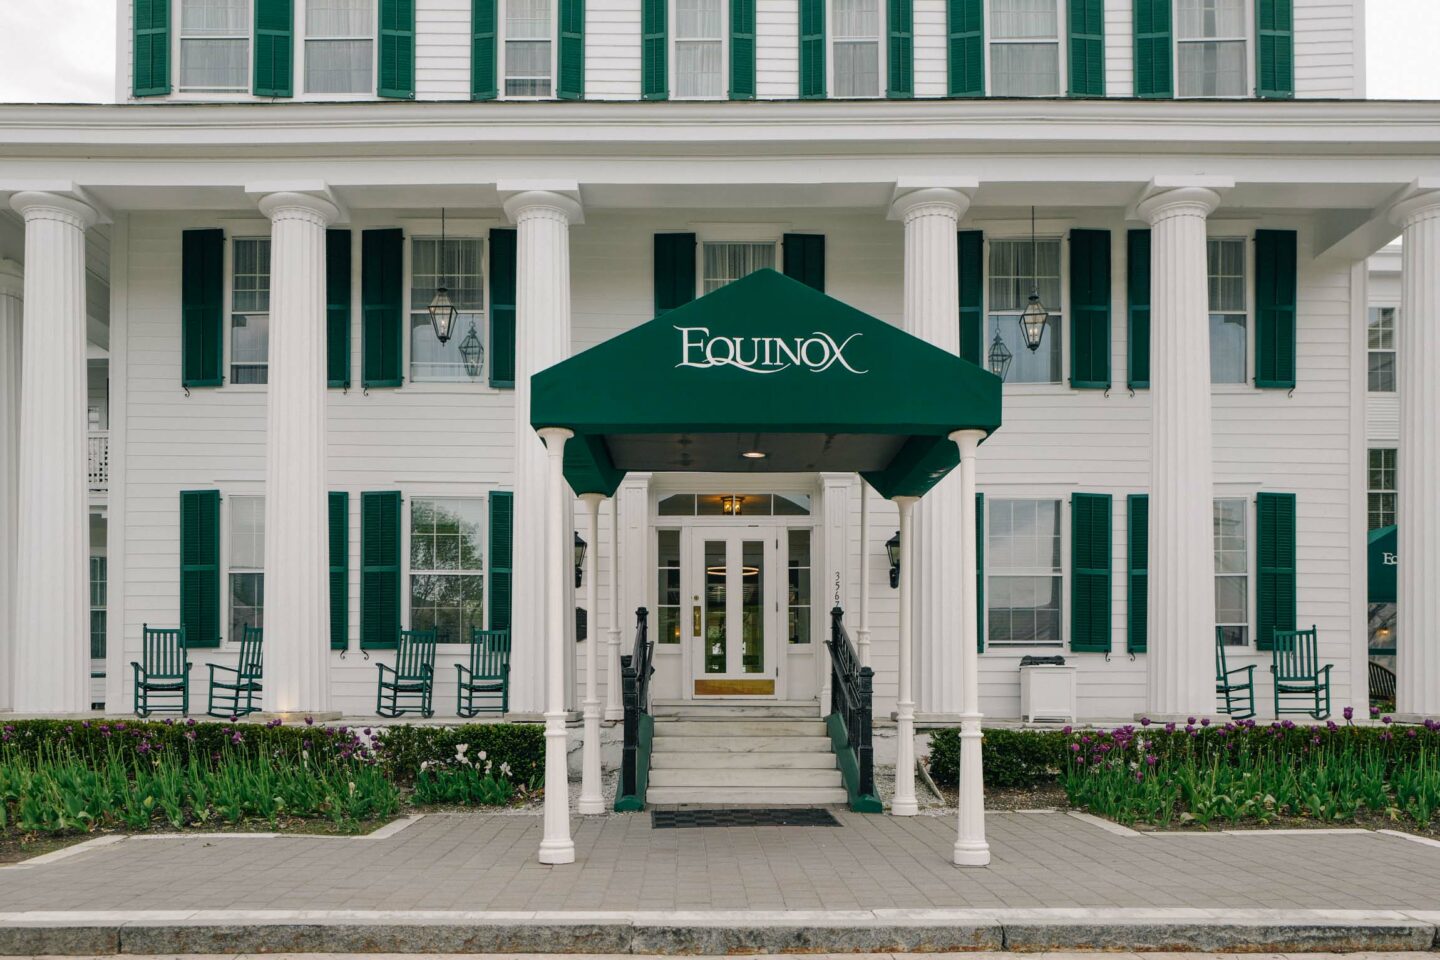 The Equinox Golf Resort and Spa